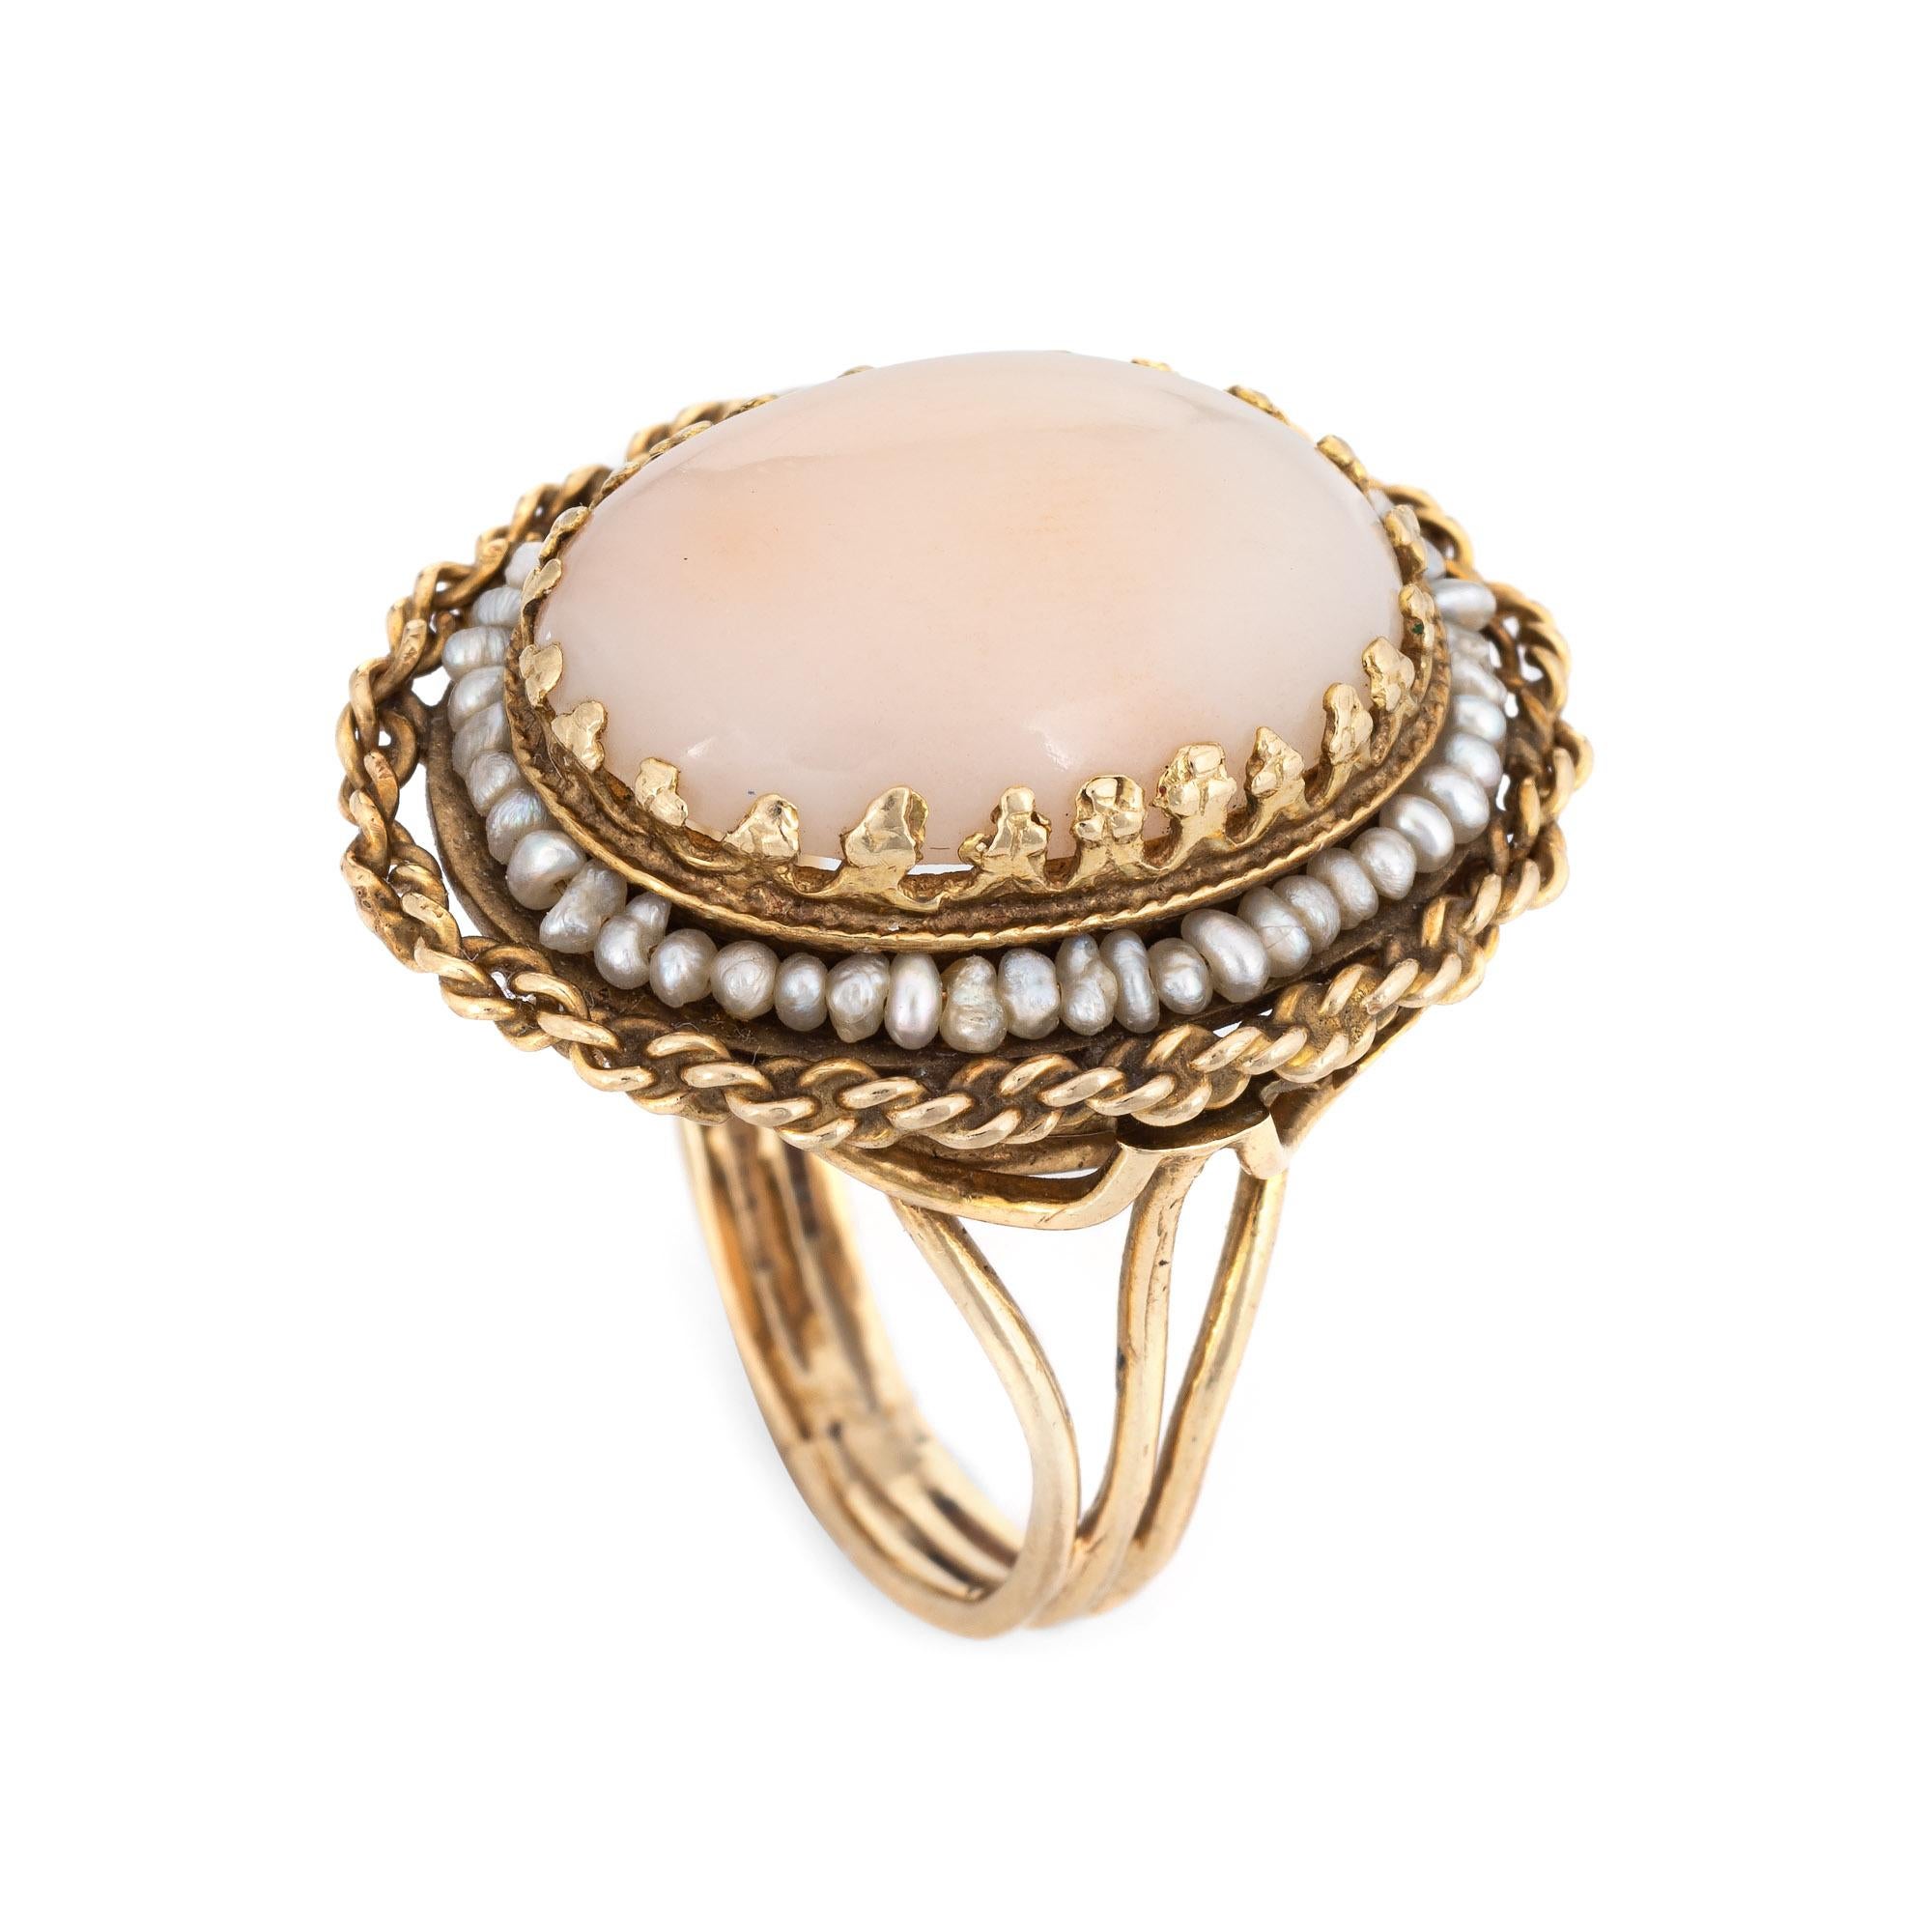 Stylish vintage coral & seed pearl cocktail ring (circa 1960s) crafted in 14 karat yellow gold. 

Coral cabochon measures 18mm x 13mm (estimated at 10 carats). The natural seed pearls measure (average) 1mm. The coral is in very good condition and